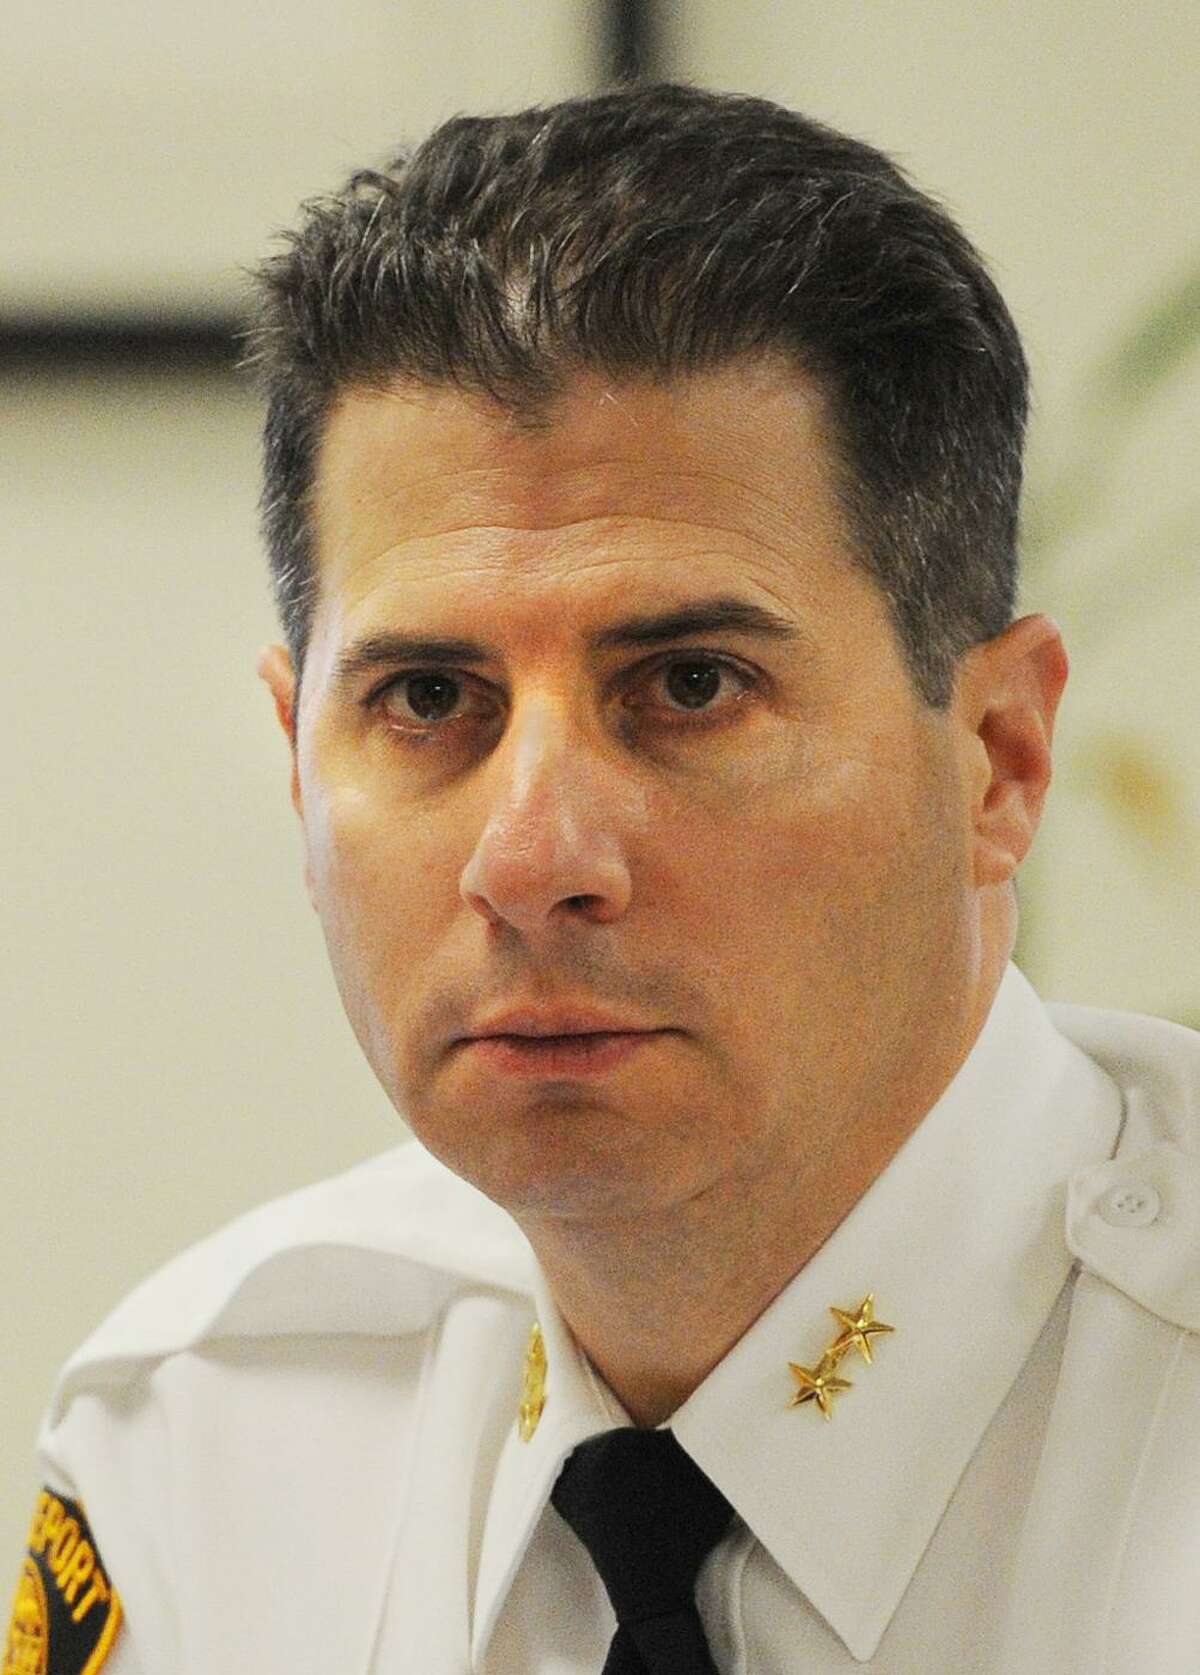 Former Bridgeport Police Assistant Chief James Nardozzi confirms he applied for the job to be Bridgeport’s police chief.